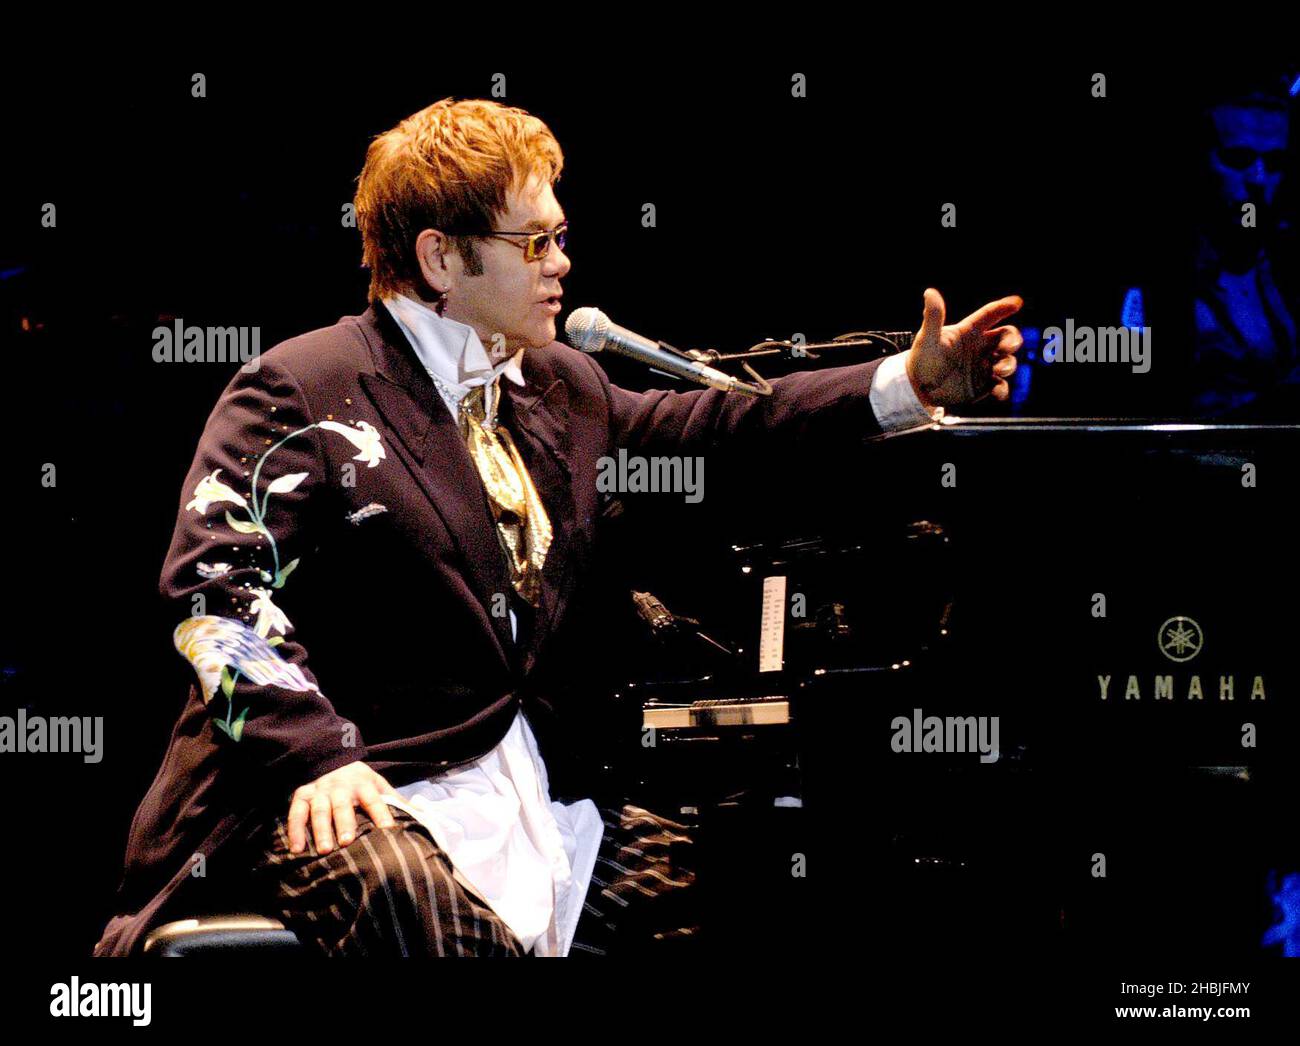 Elton John performing live in concert at the Hammersmith Apollo, west London. Stock Photo